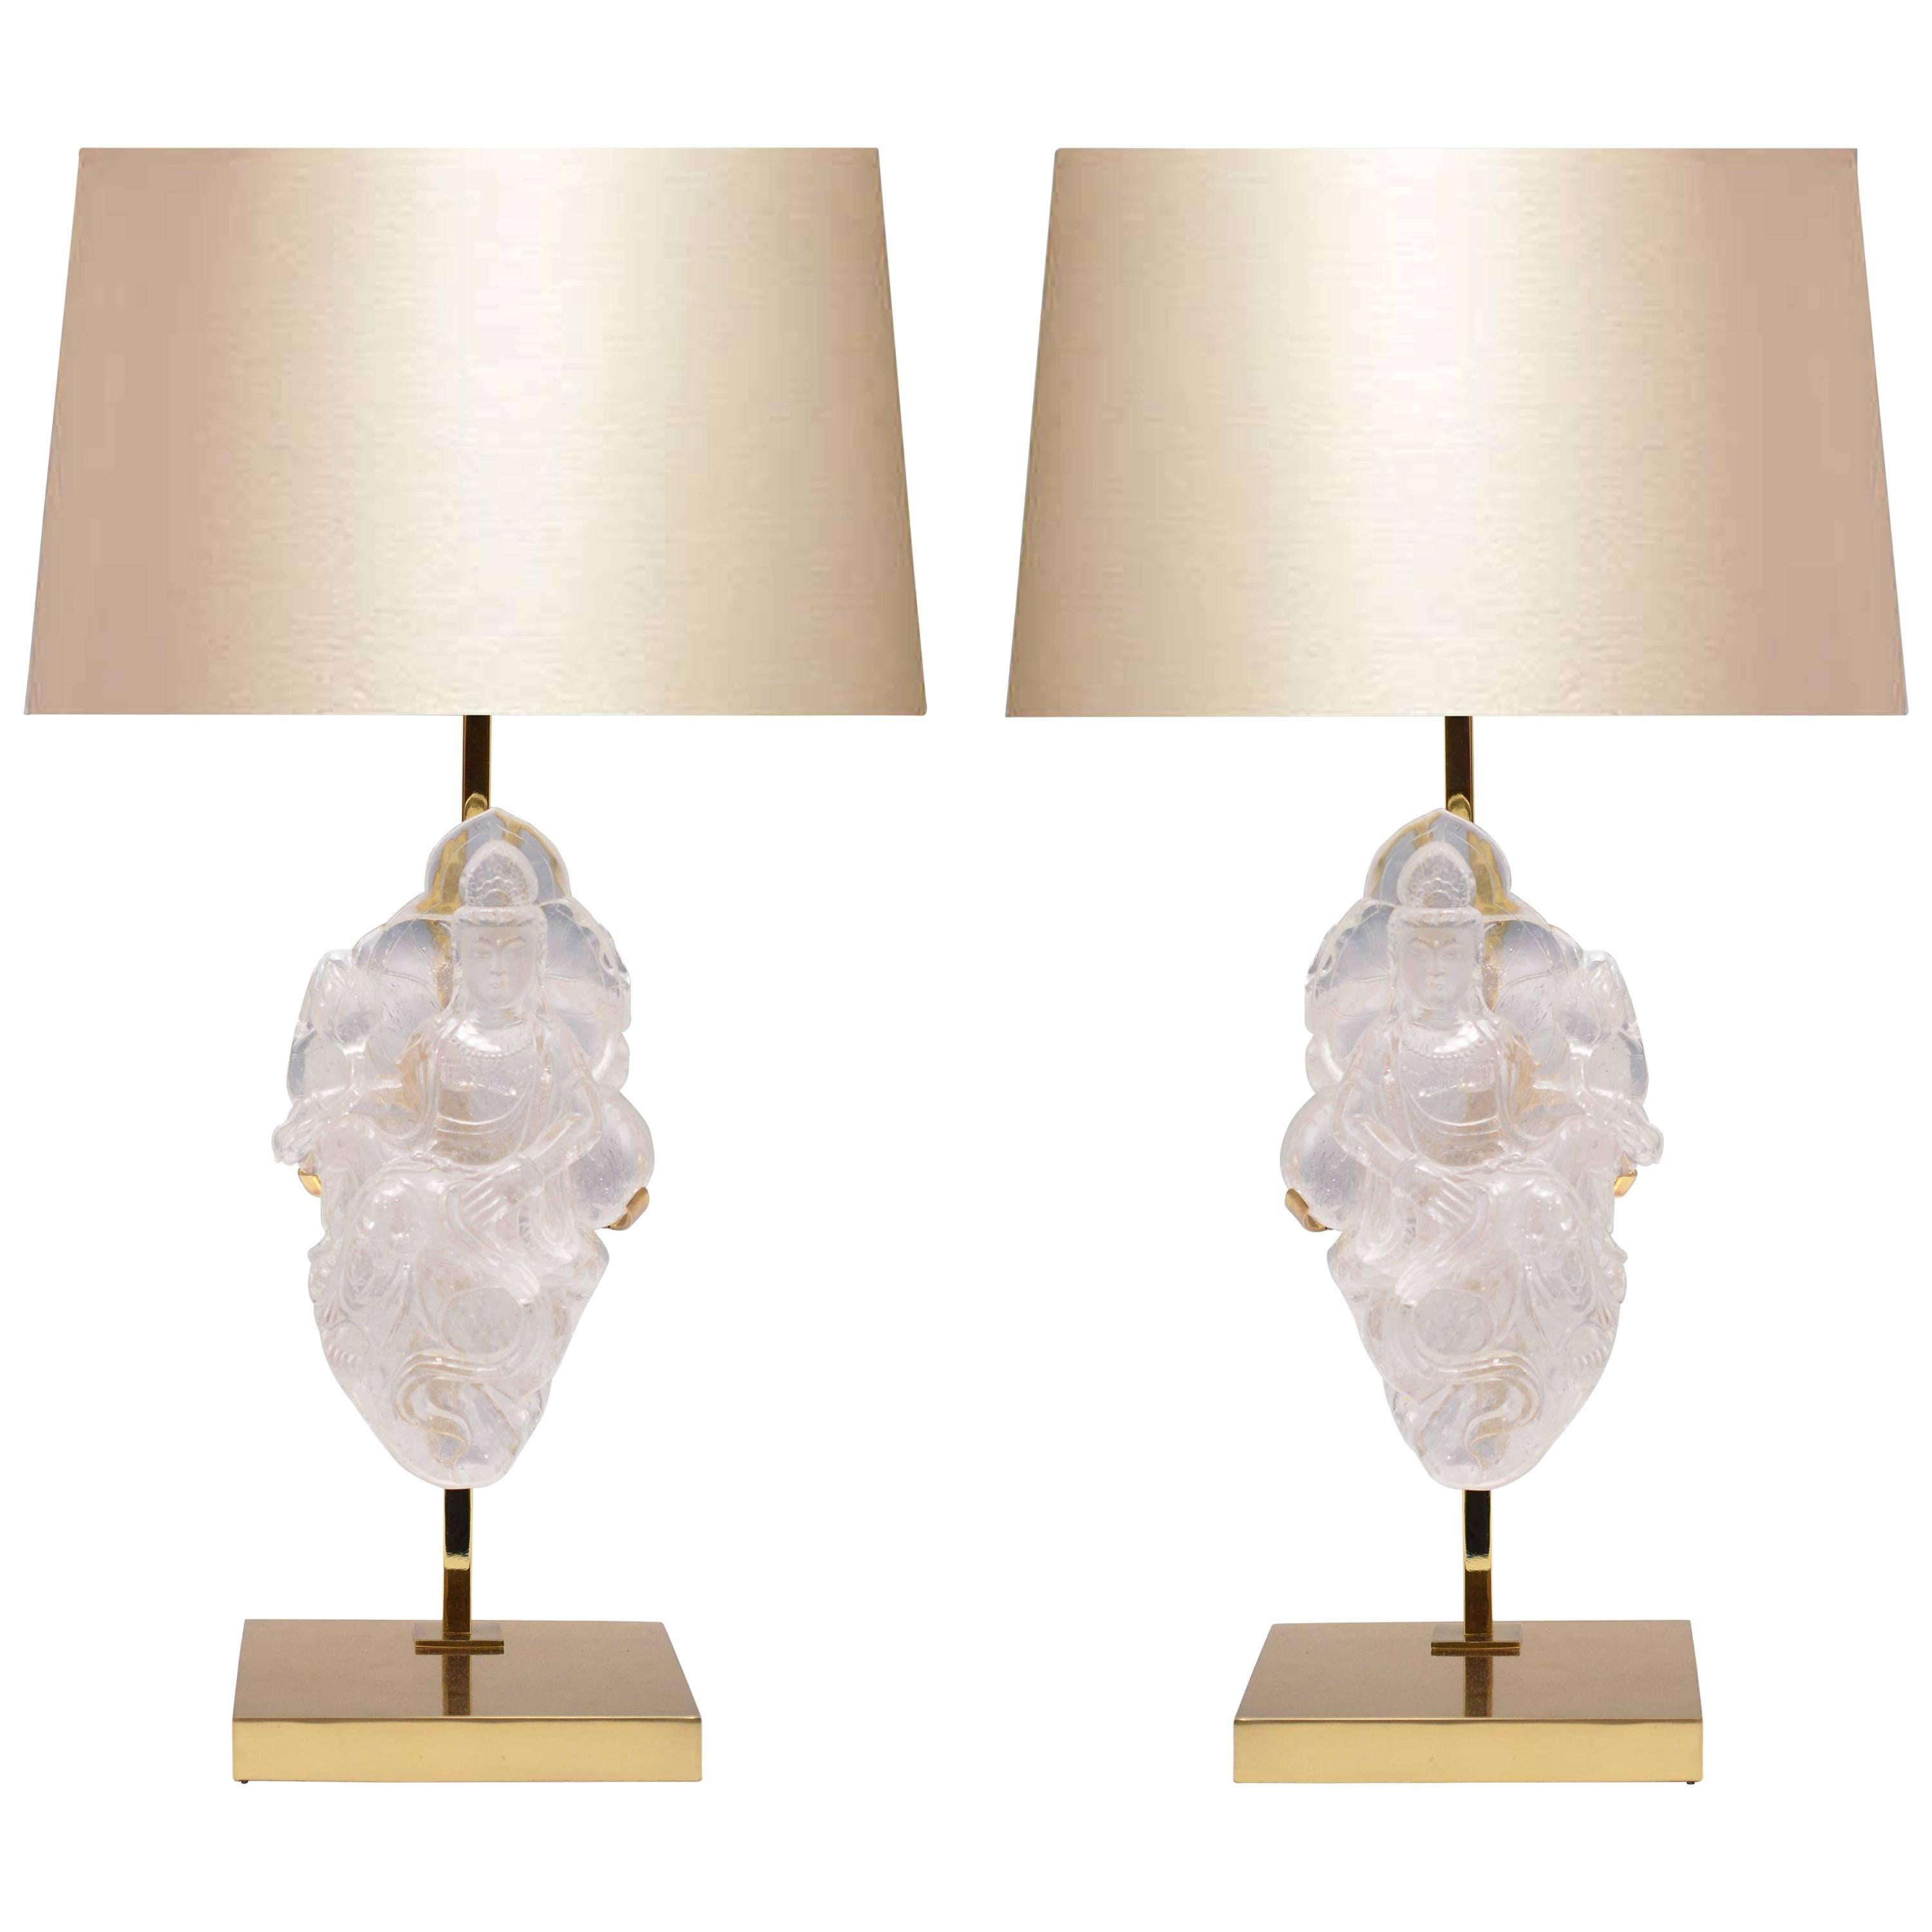 Pair of Fine Carved Rock Crystal Quartz Lamps